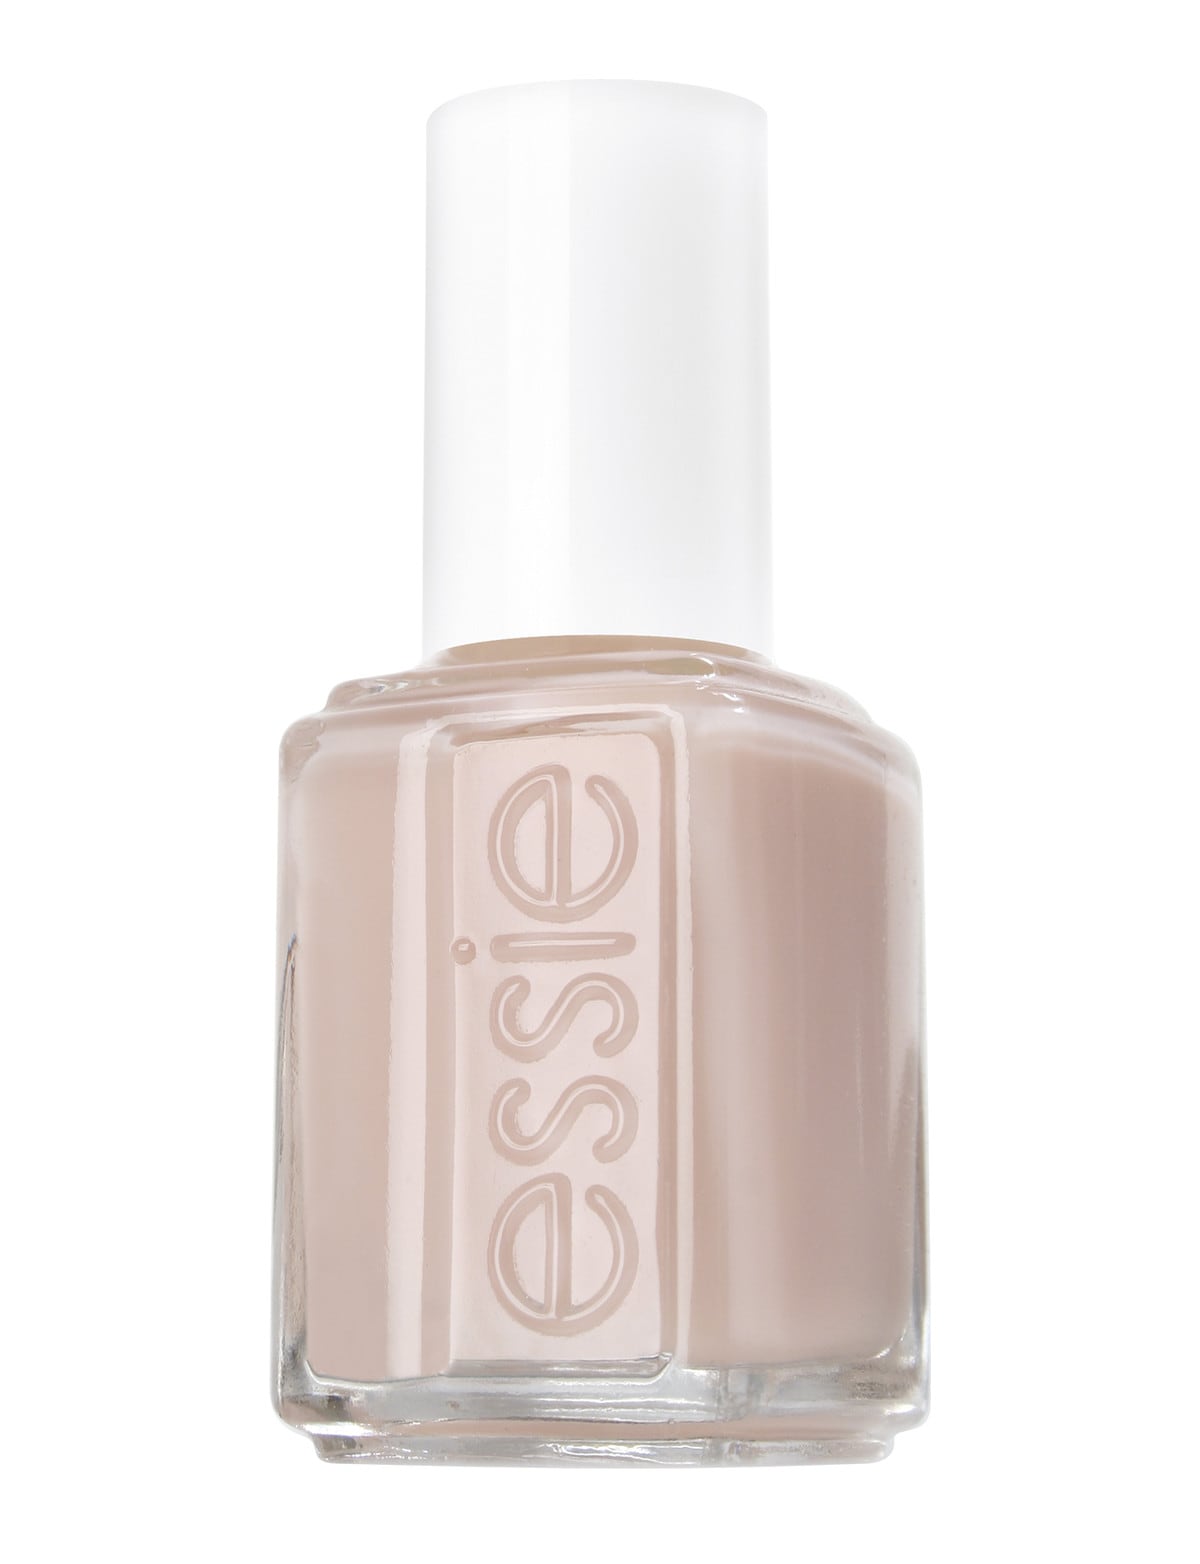 Essie Ballet Slippers Is the Prettiest Sheer Pink Nail Polish Ever: Review